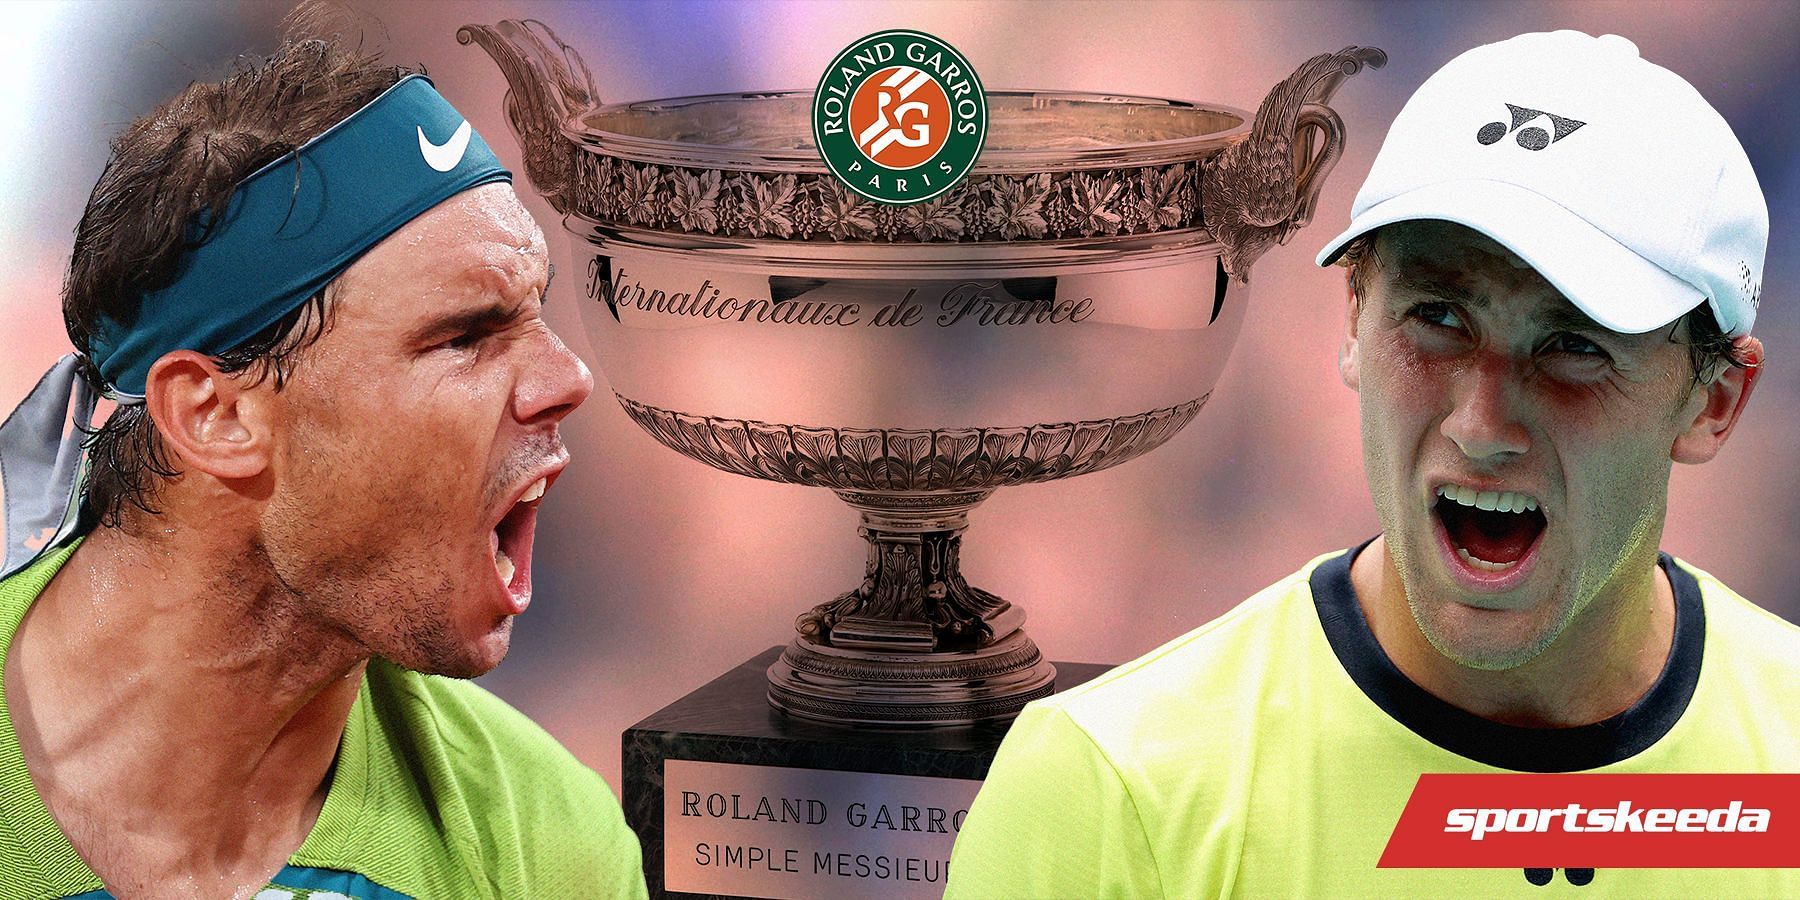 French Open 2022 final, Rafael Nadal vs Casper Ruud Where to watch, TV Schedule, Live stream details, and more